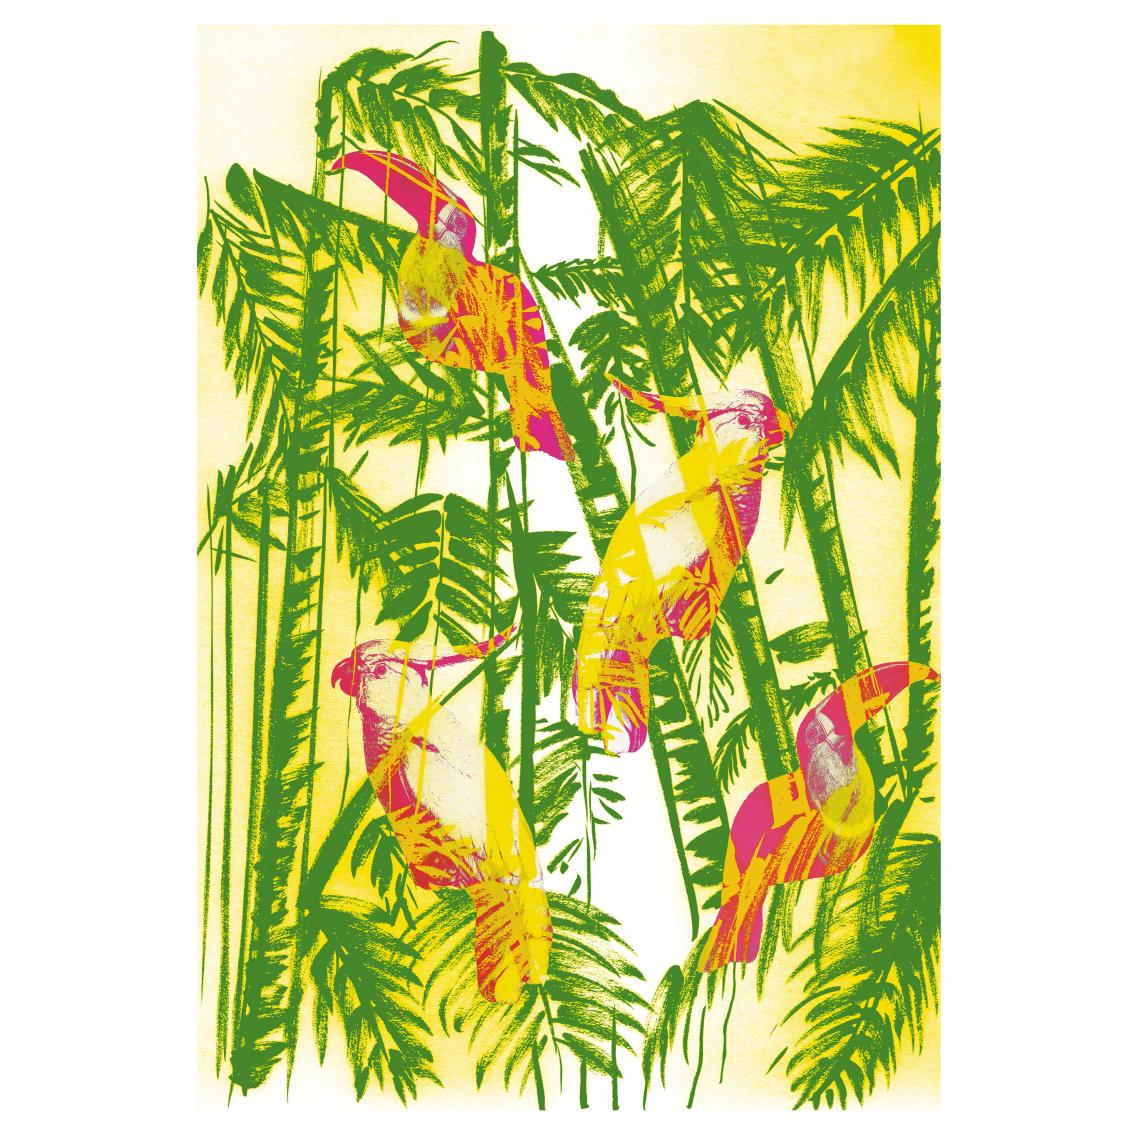 Beneffito - NATURE - Signature Poster - Jungle_2 - 40x60 cm - Affiches, posters